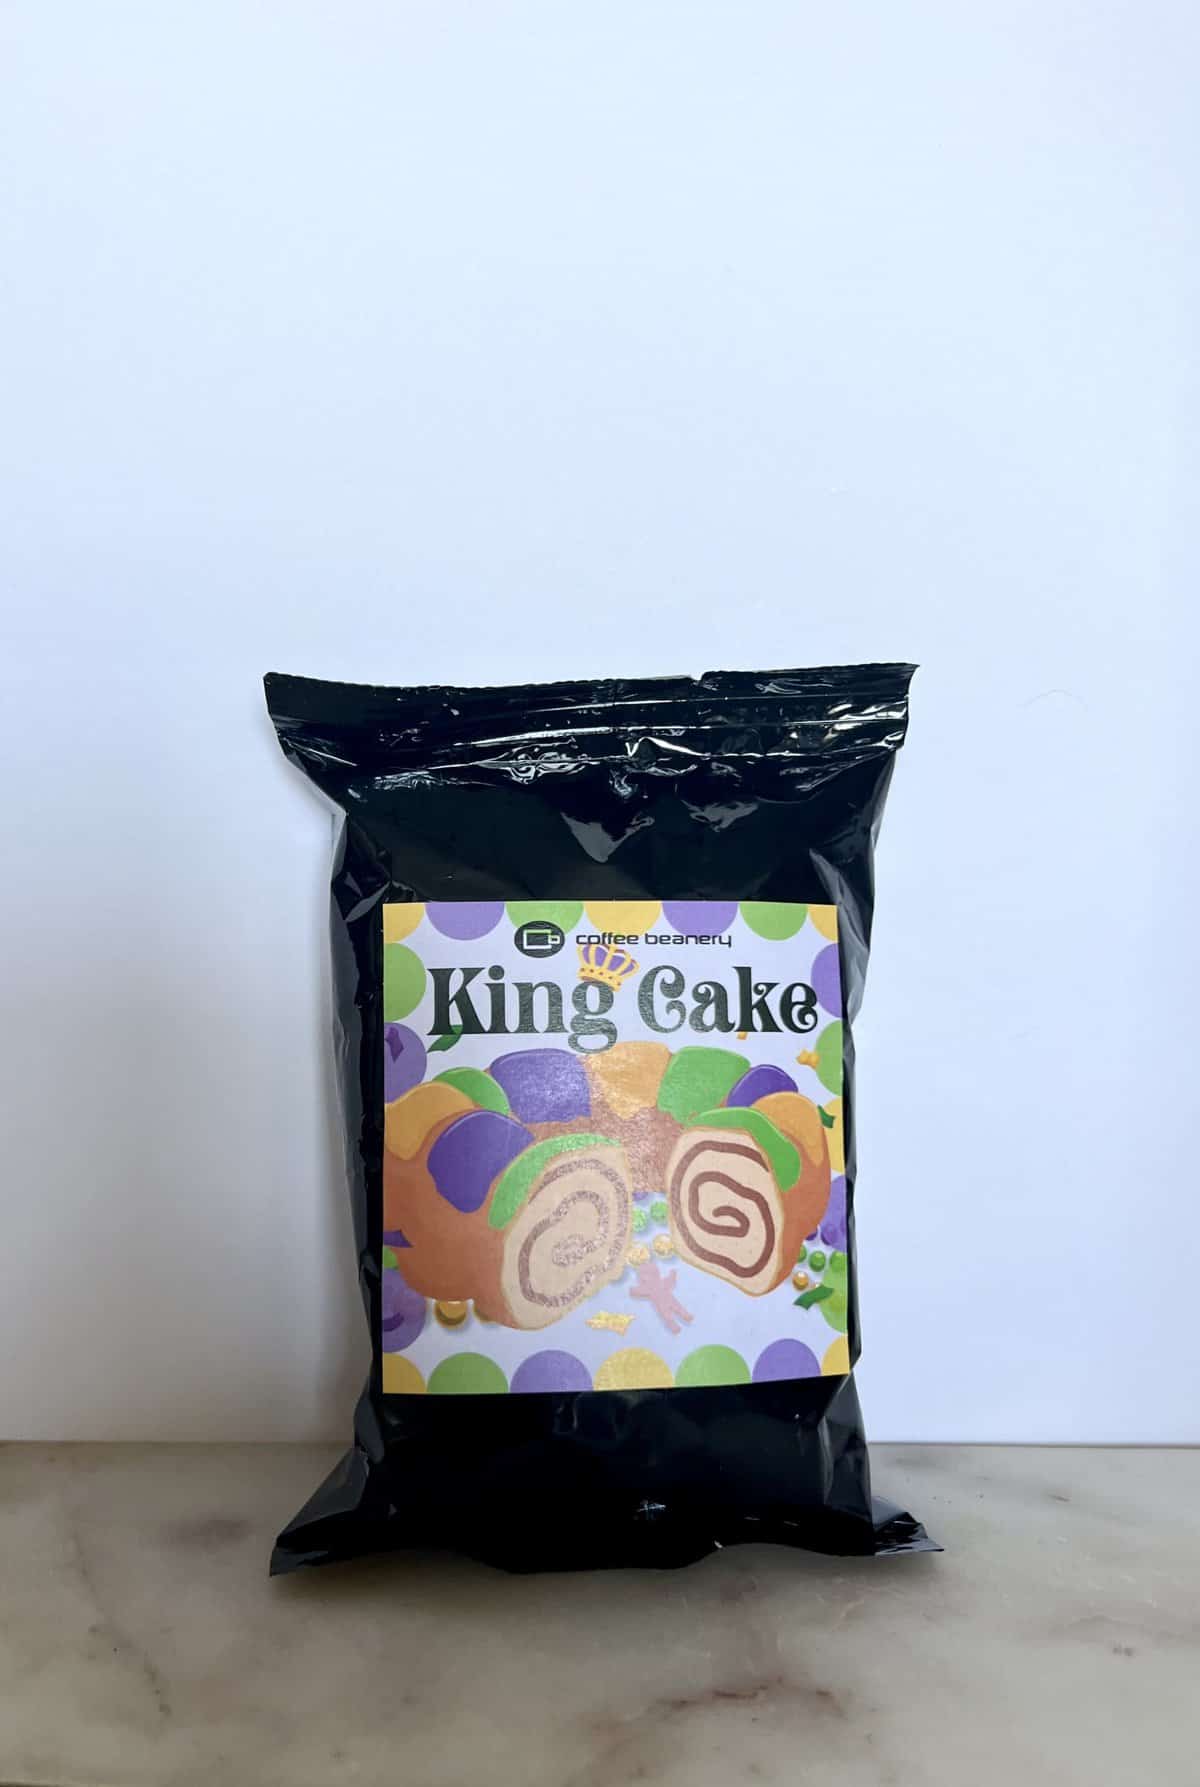 packaging-coffee-beanery-King-Cake-scaled